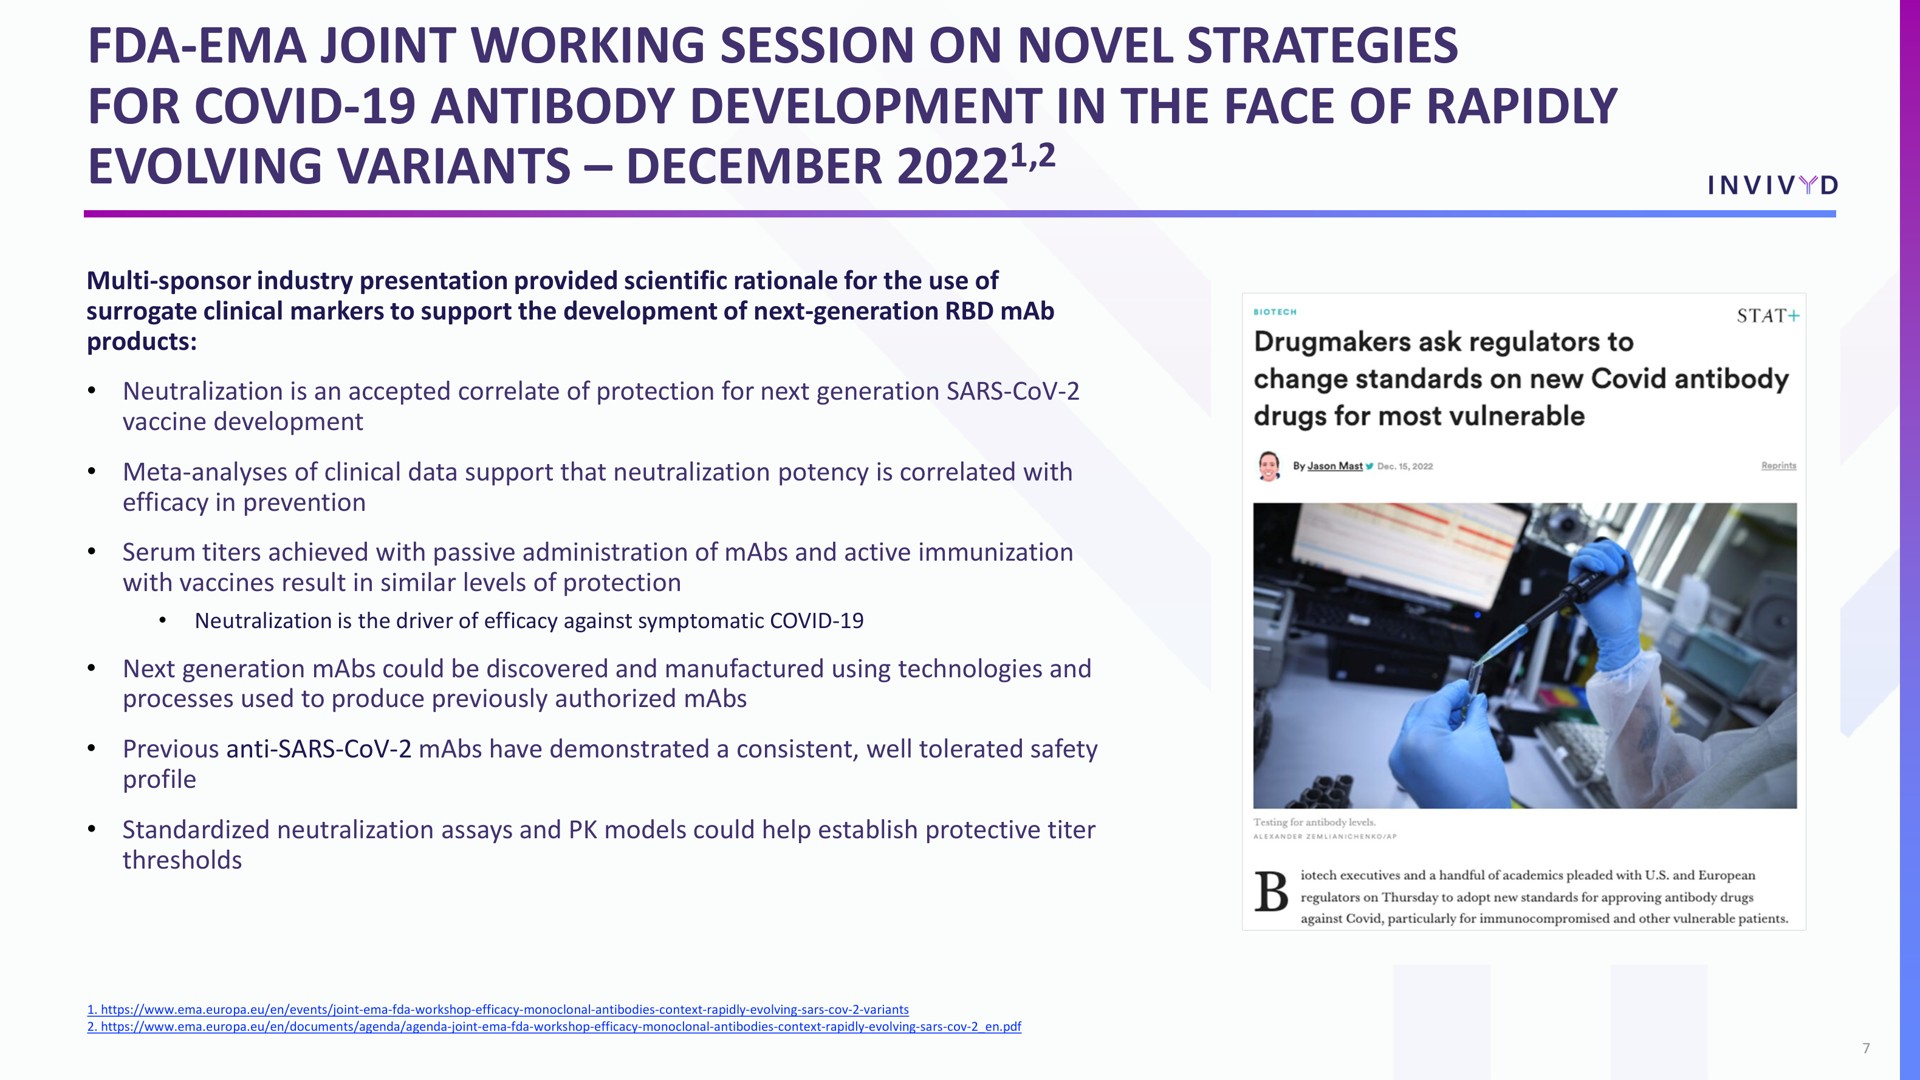 joint working session on novel strategies for covid antibody development in the face of rapidly evolving variants | Adagio Therapeutics